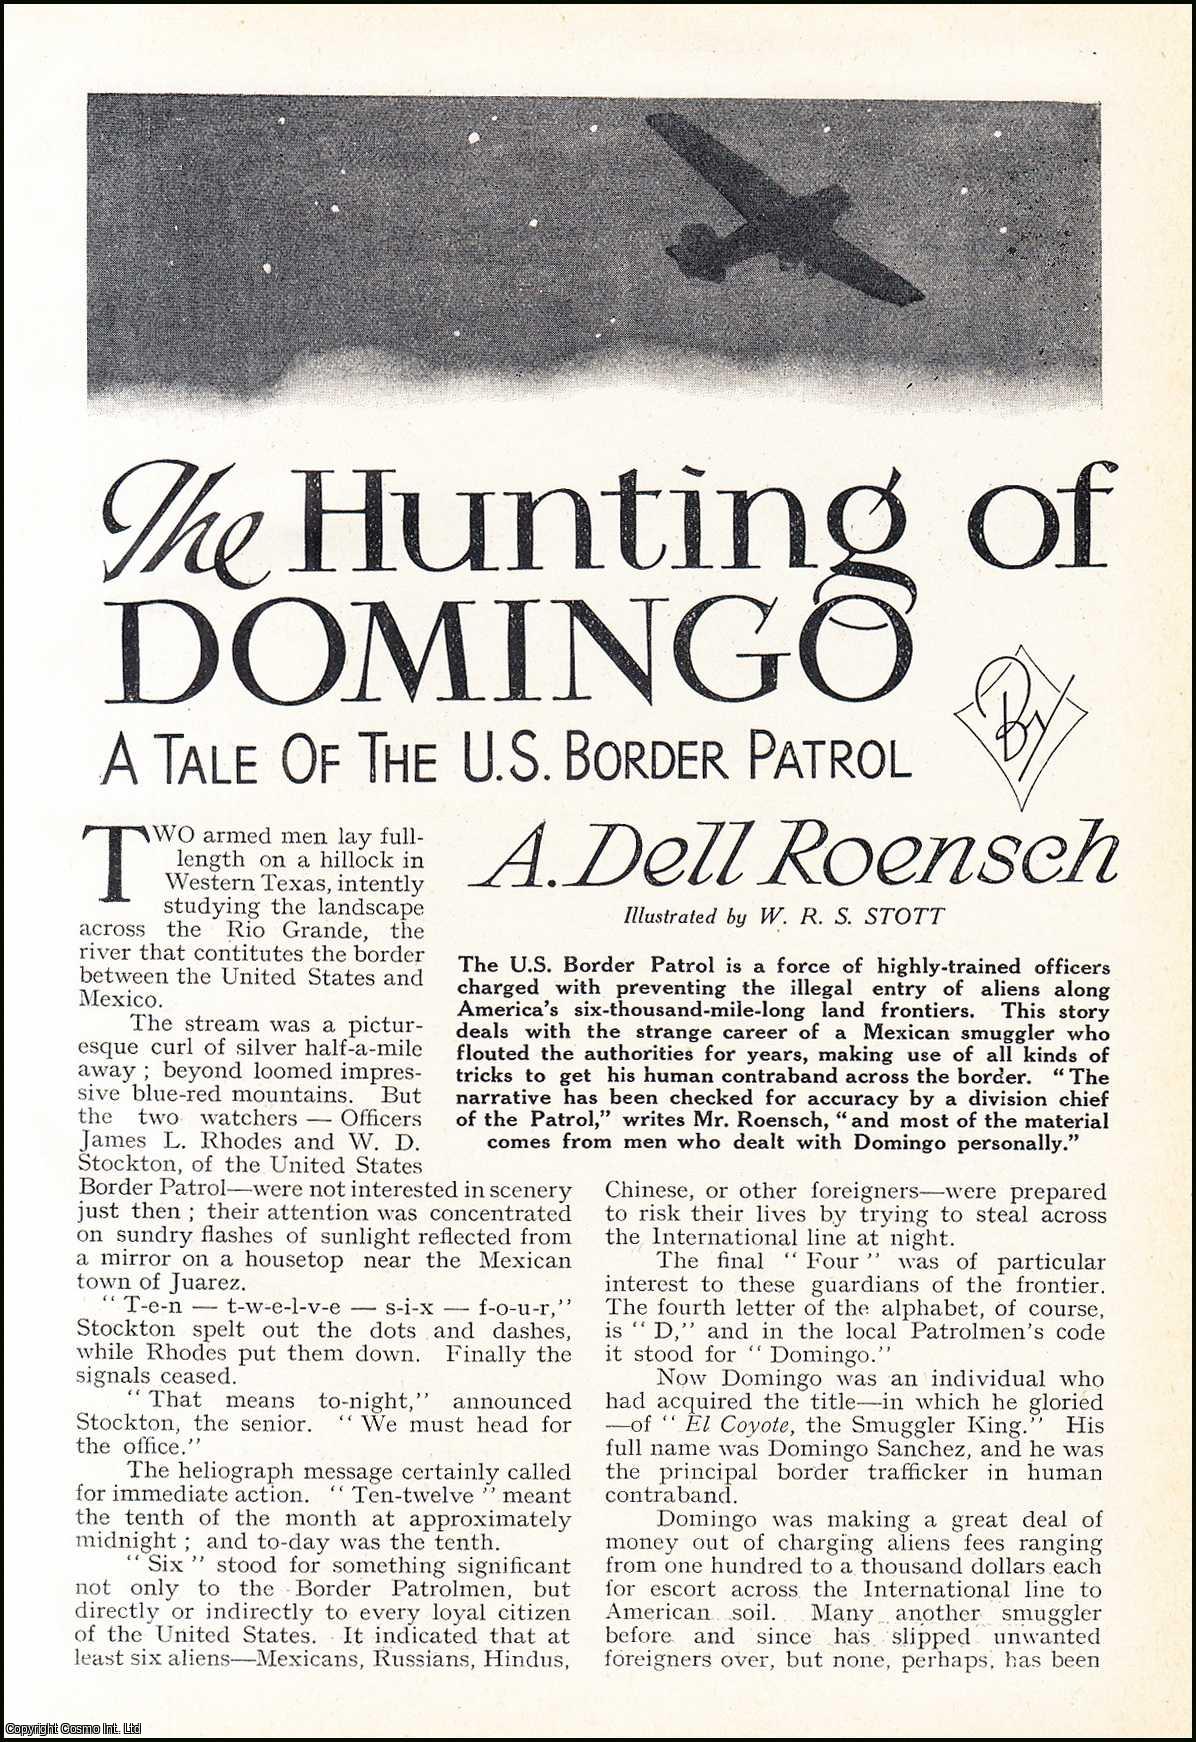 A. Dell Roensch, illustrated by W.R.S. Stott. - The Hunting of Domingo. A Tale of The U. S. Border Patrol. An uncommon original article from the Wide World Magazine, 1938.